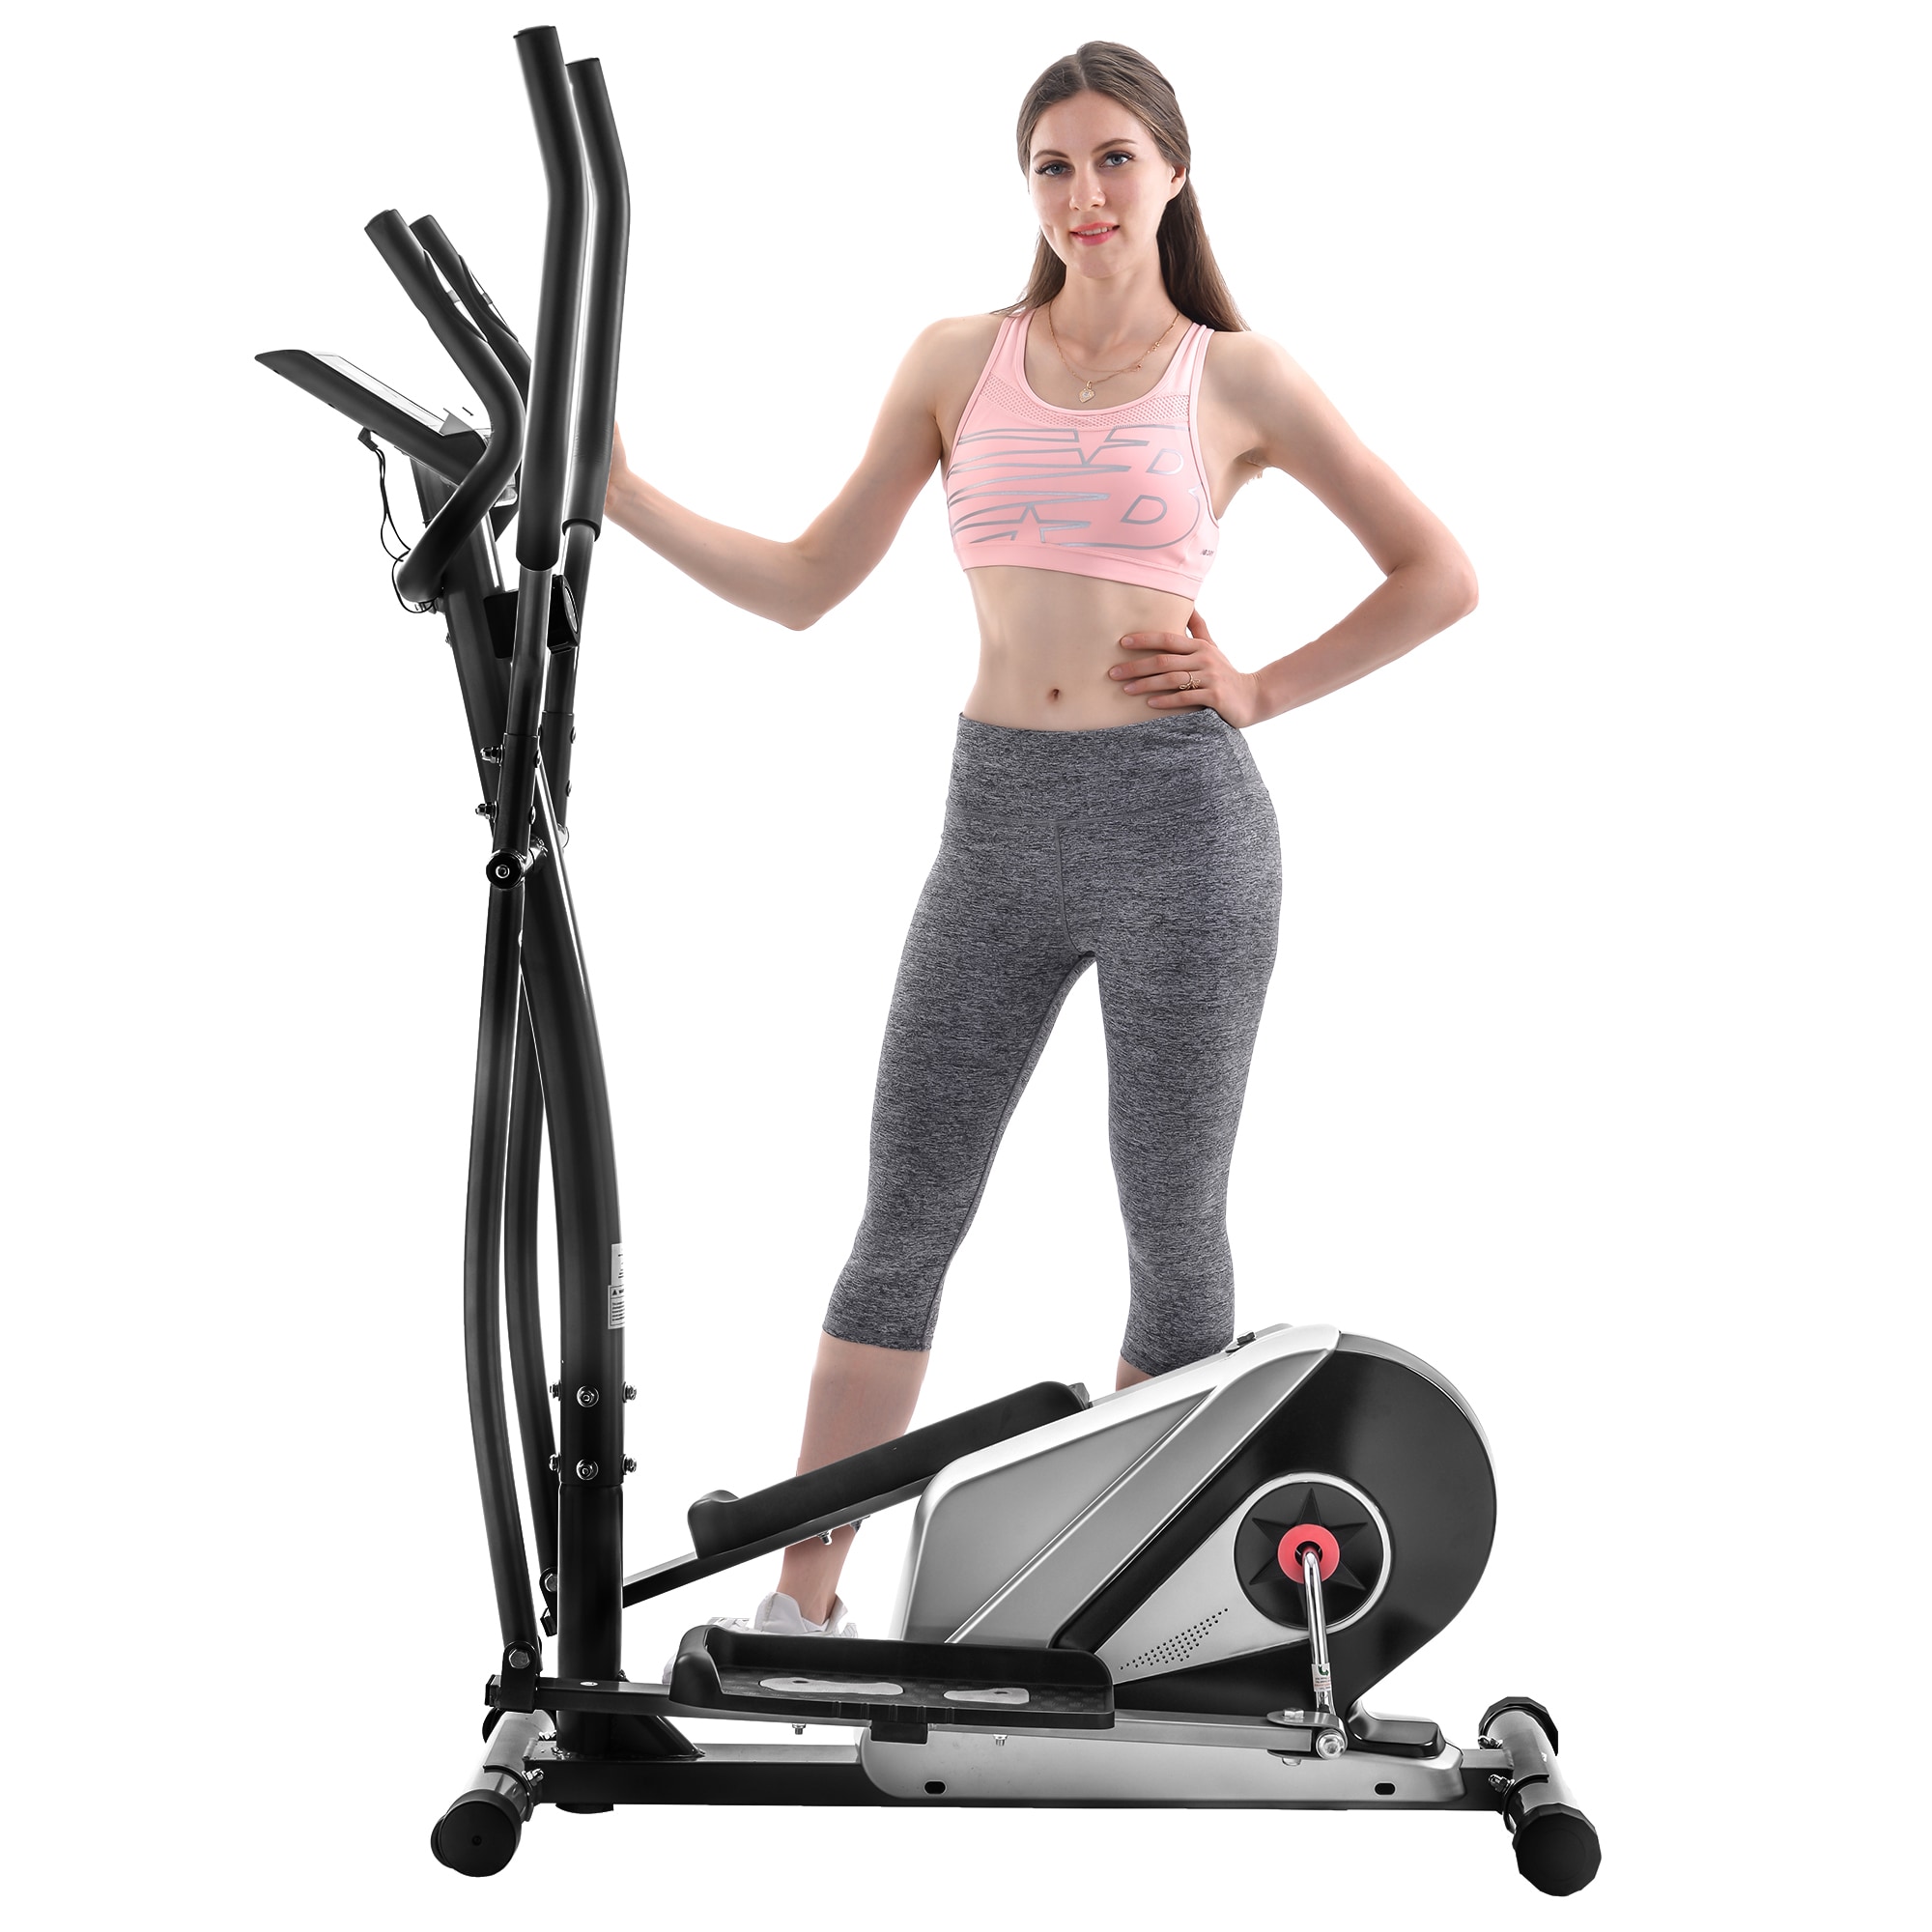 Magnetic Elliptical Bike Workout Trainer Smooth Quiet Home Gym Fitness Exercise 